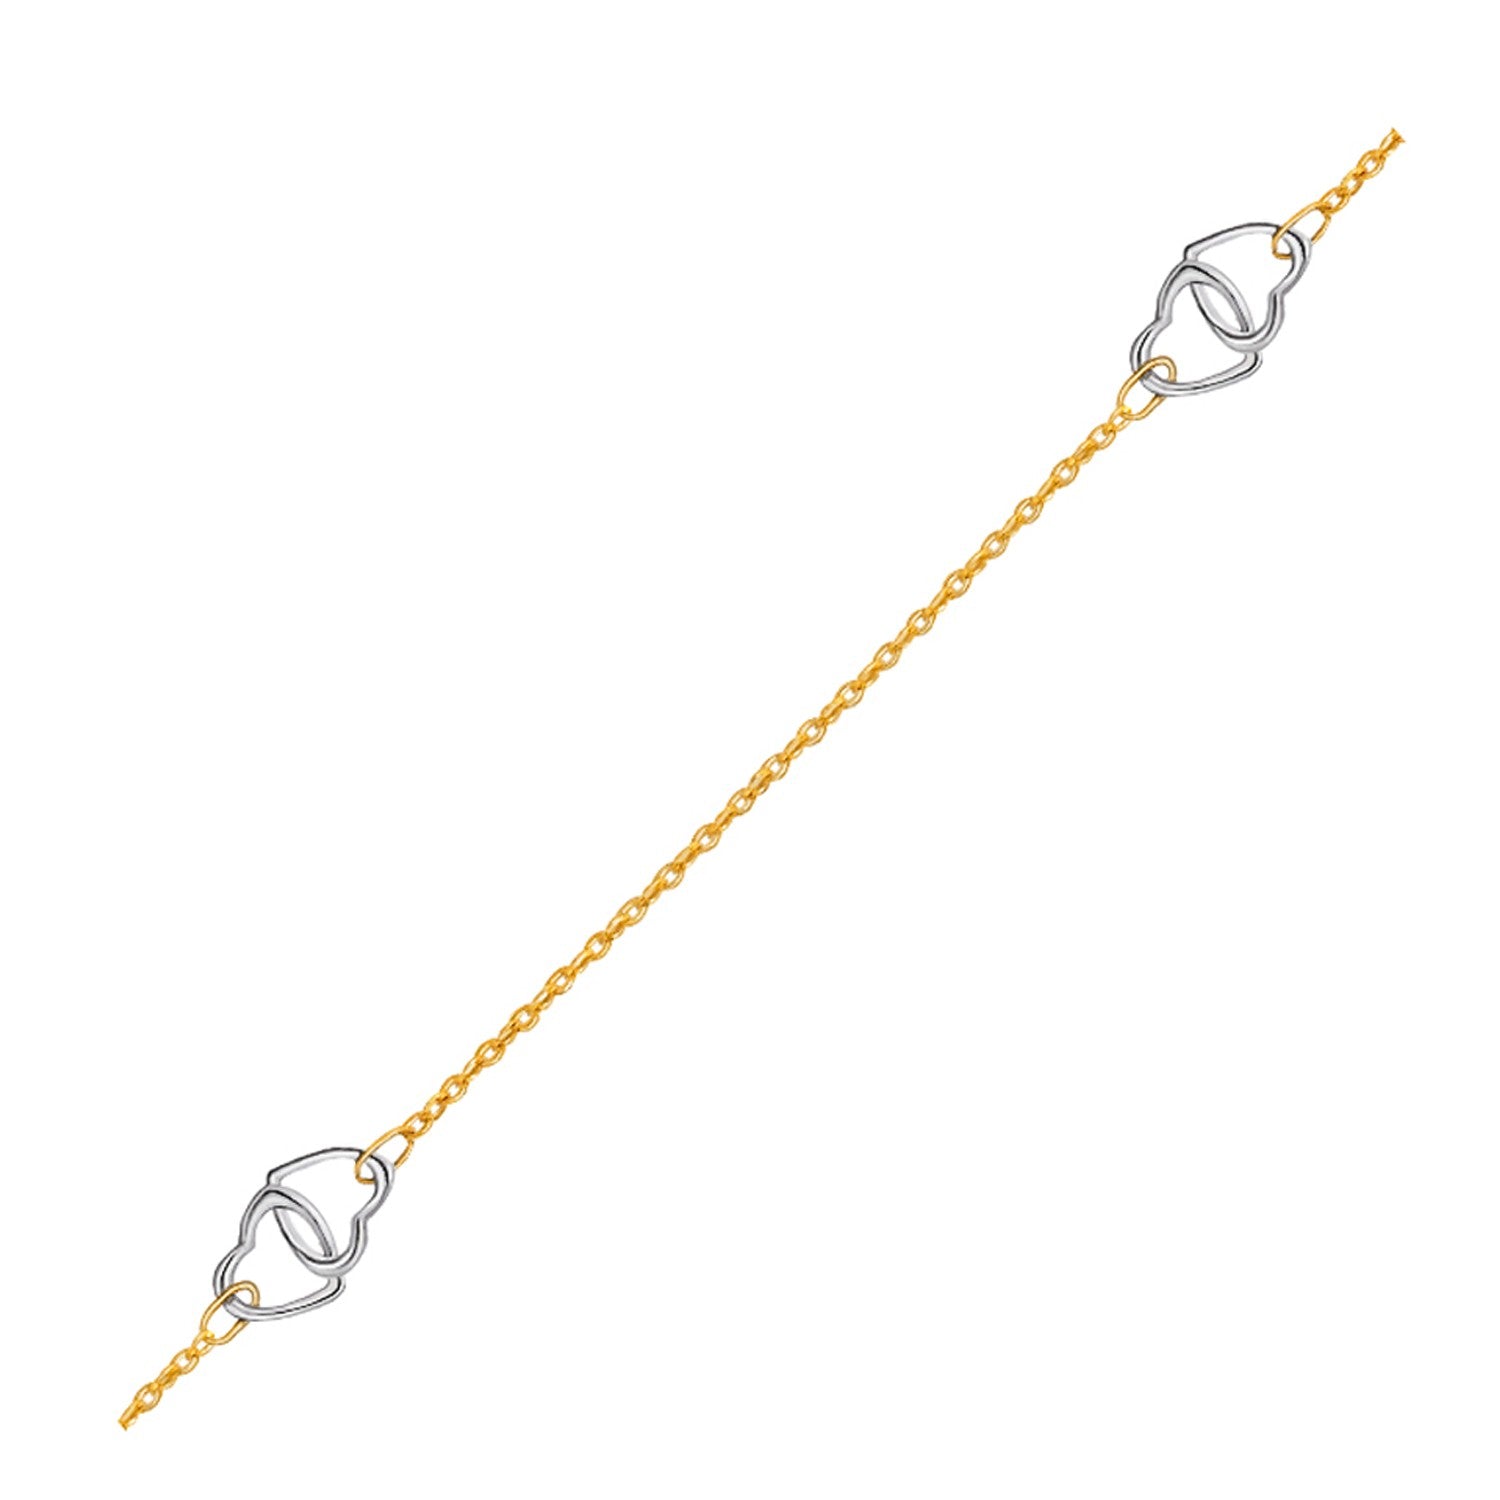 14k Two Tone Gold Entwined Heart Stationed Anklet